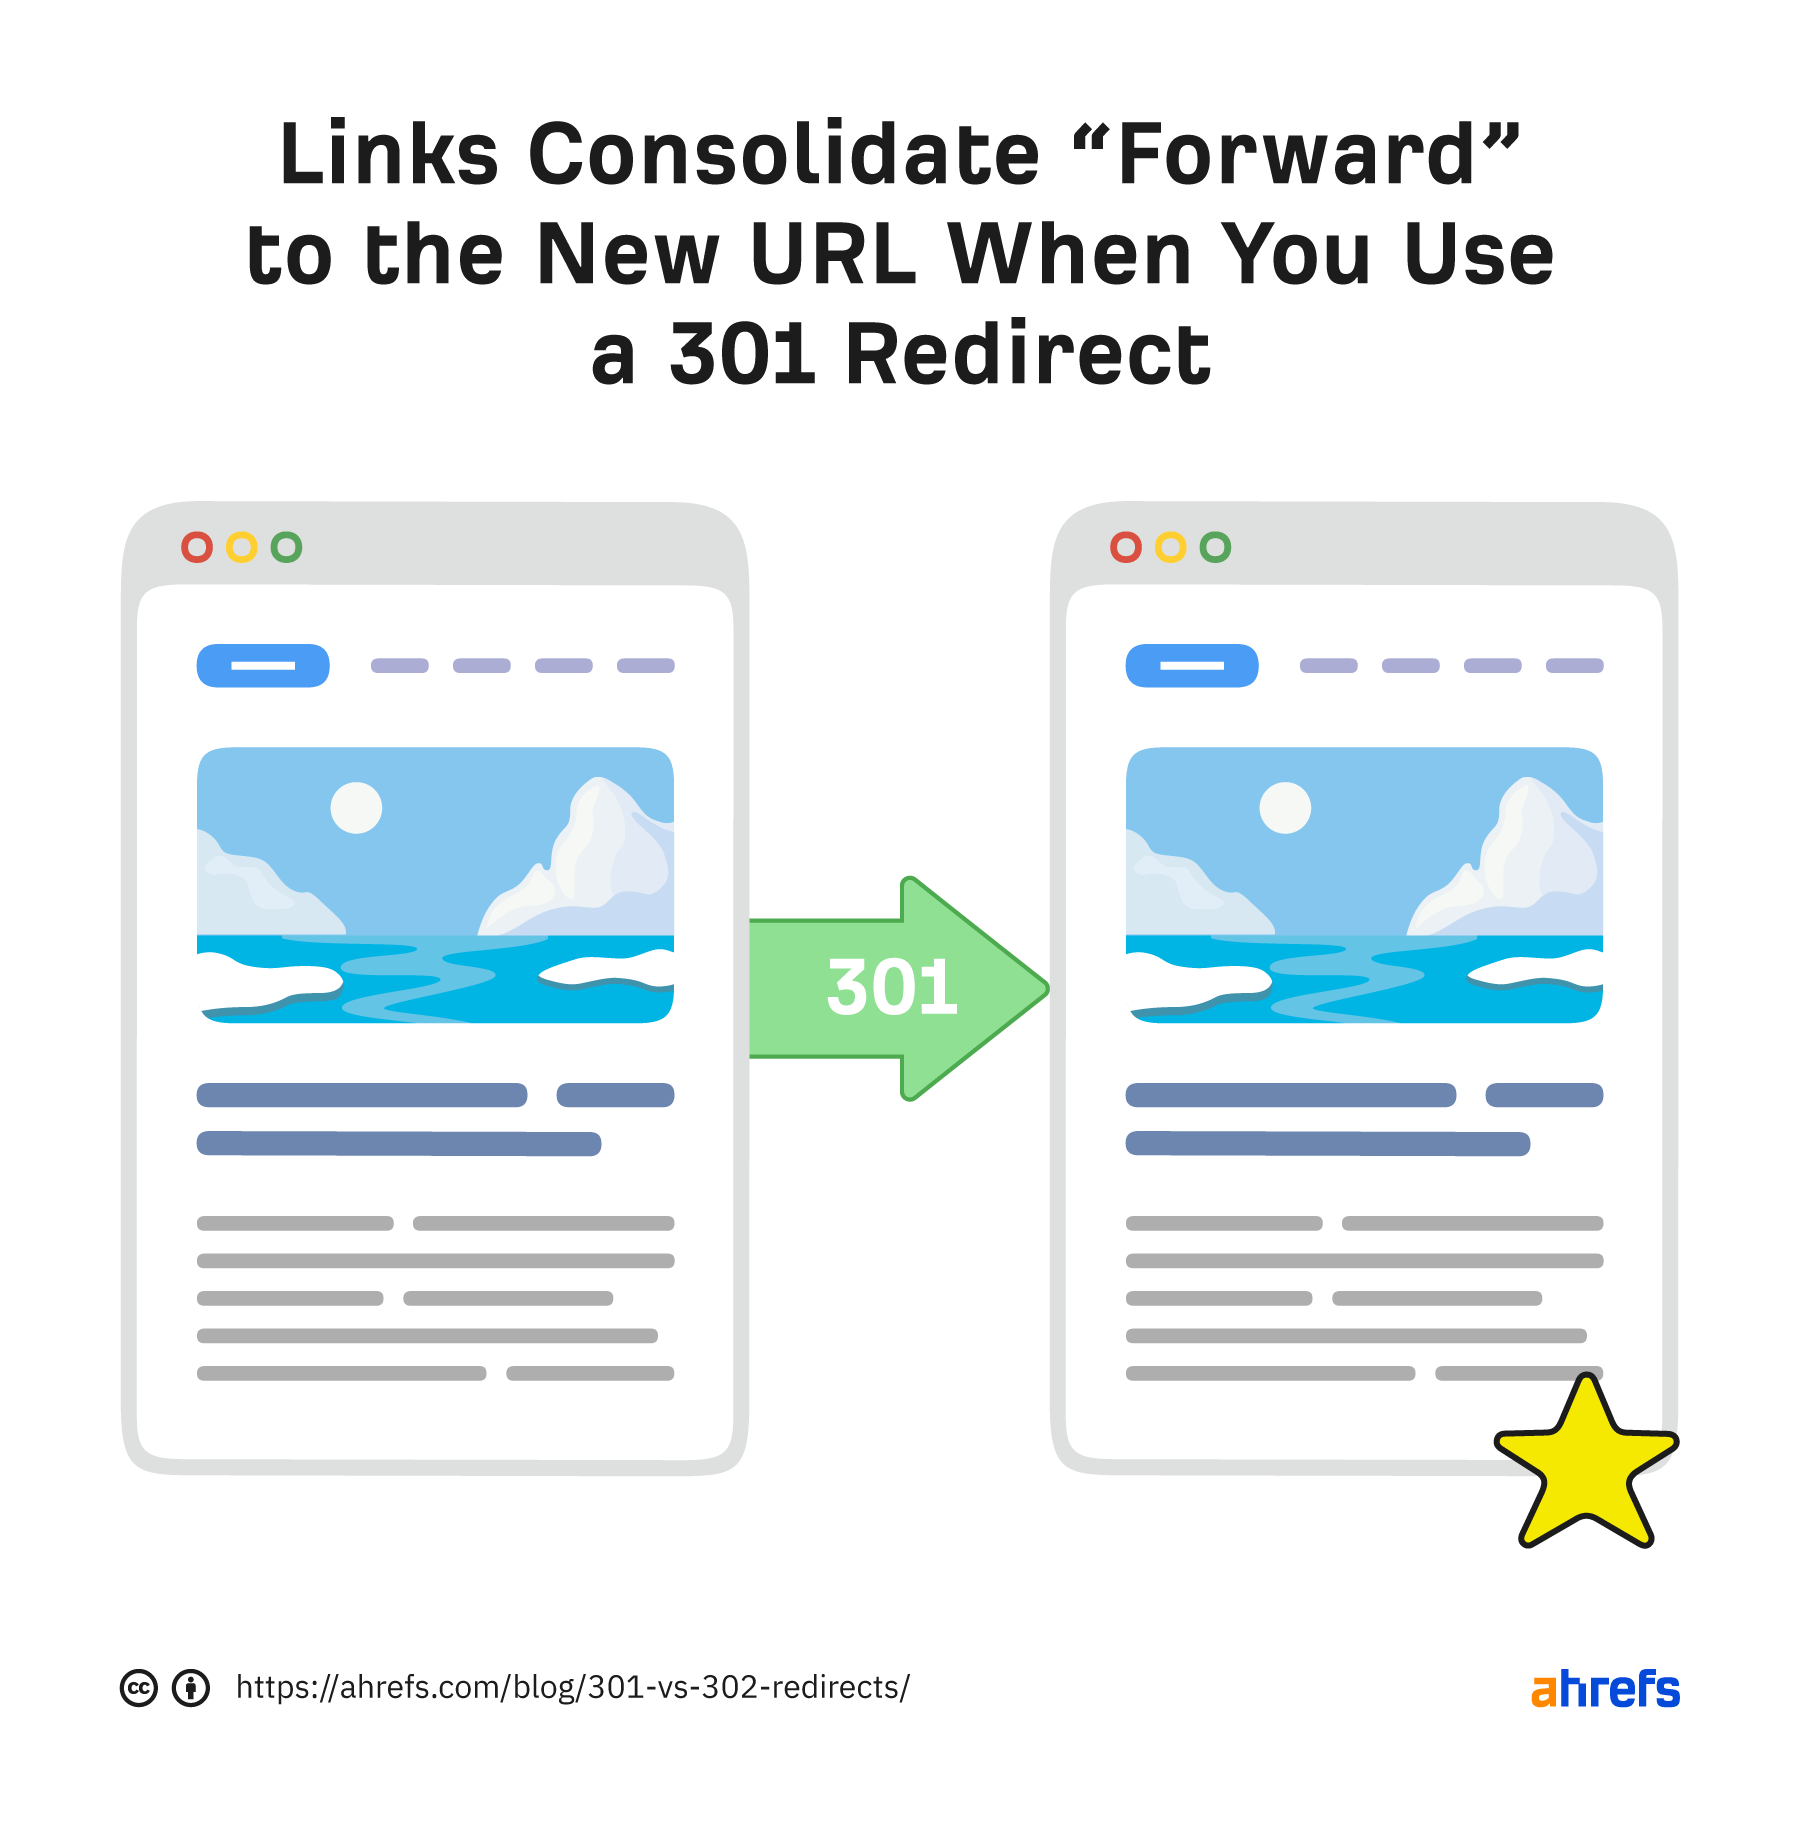 Links consolidate “forward” to the new URL when you use a 301 redirect